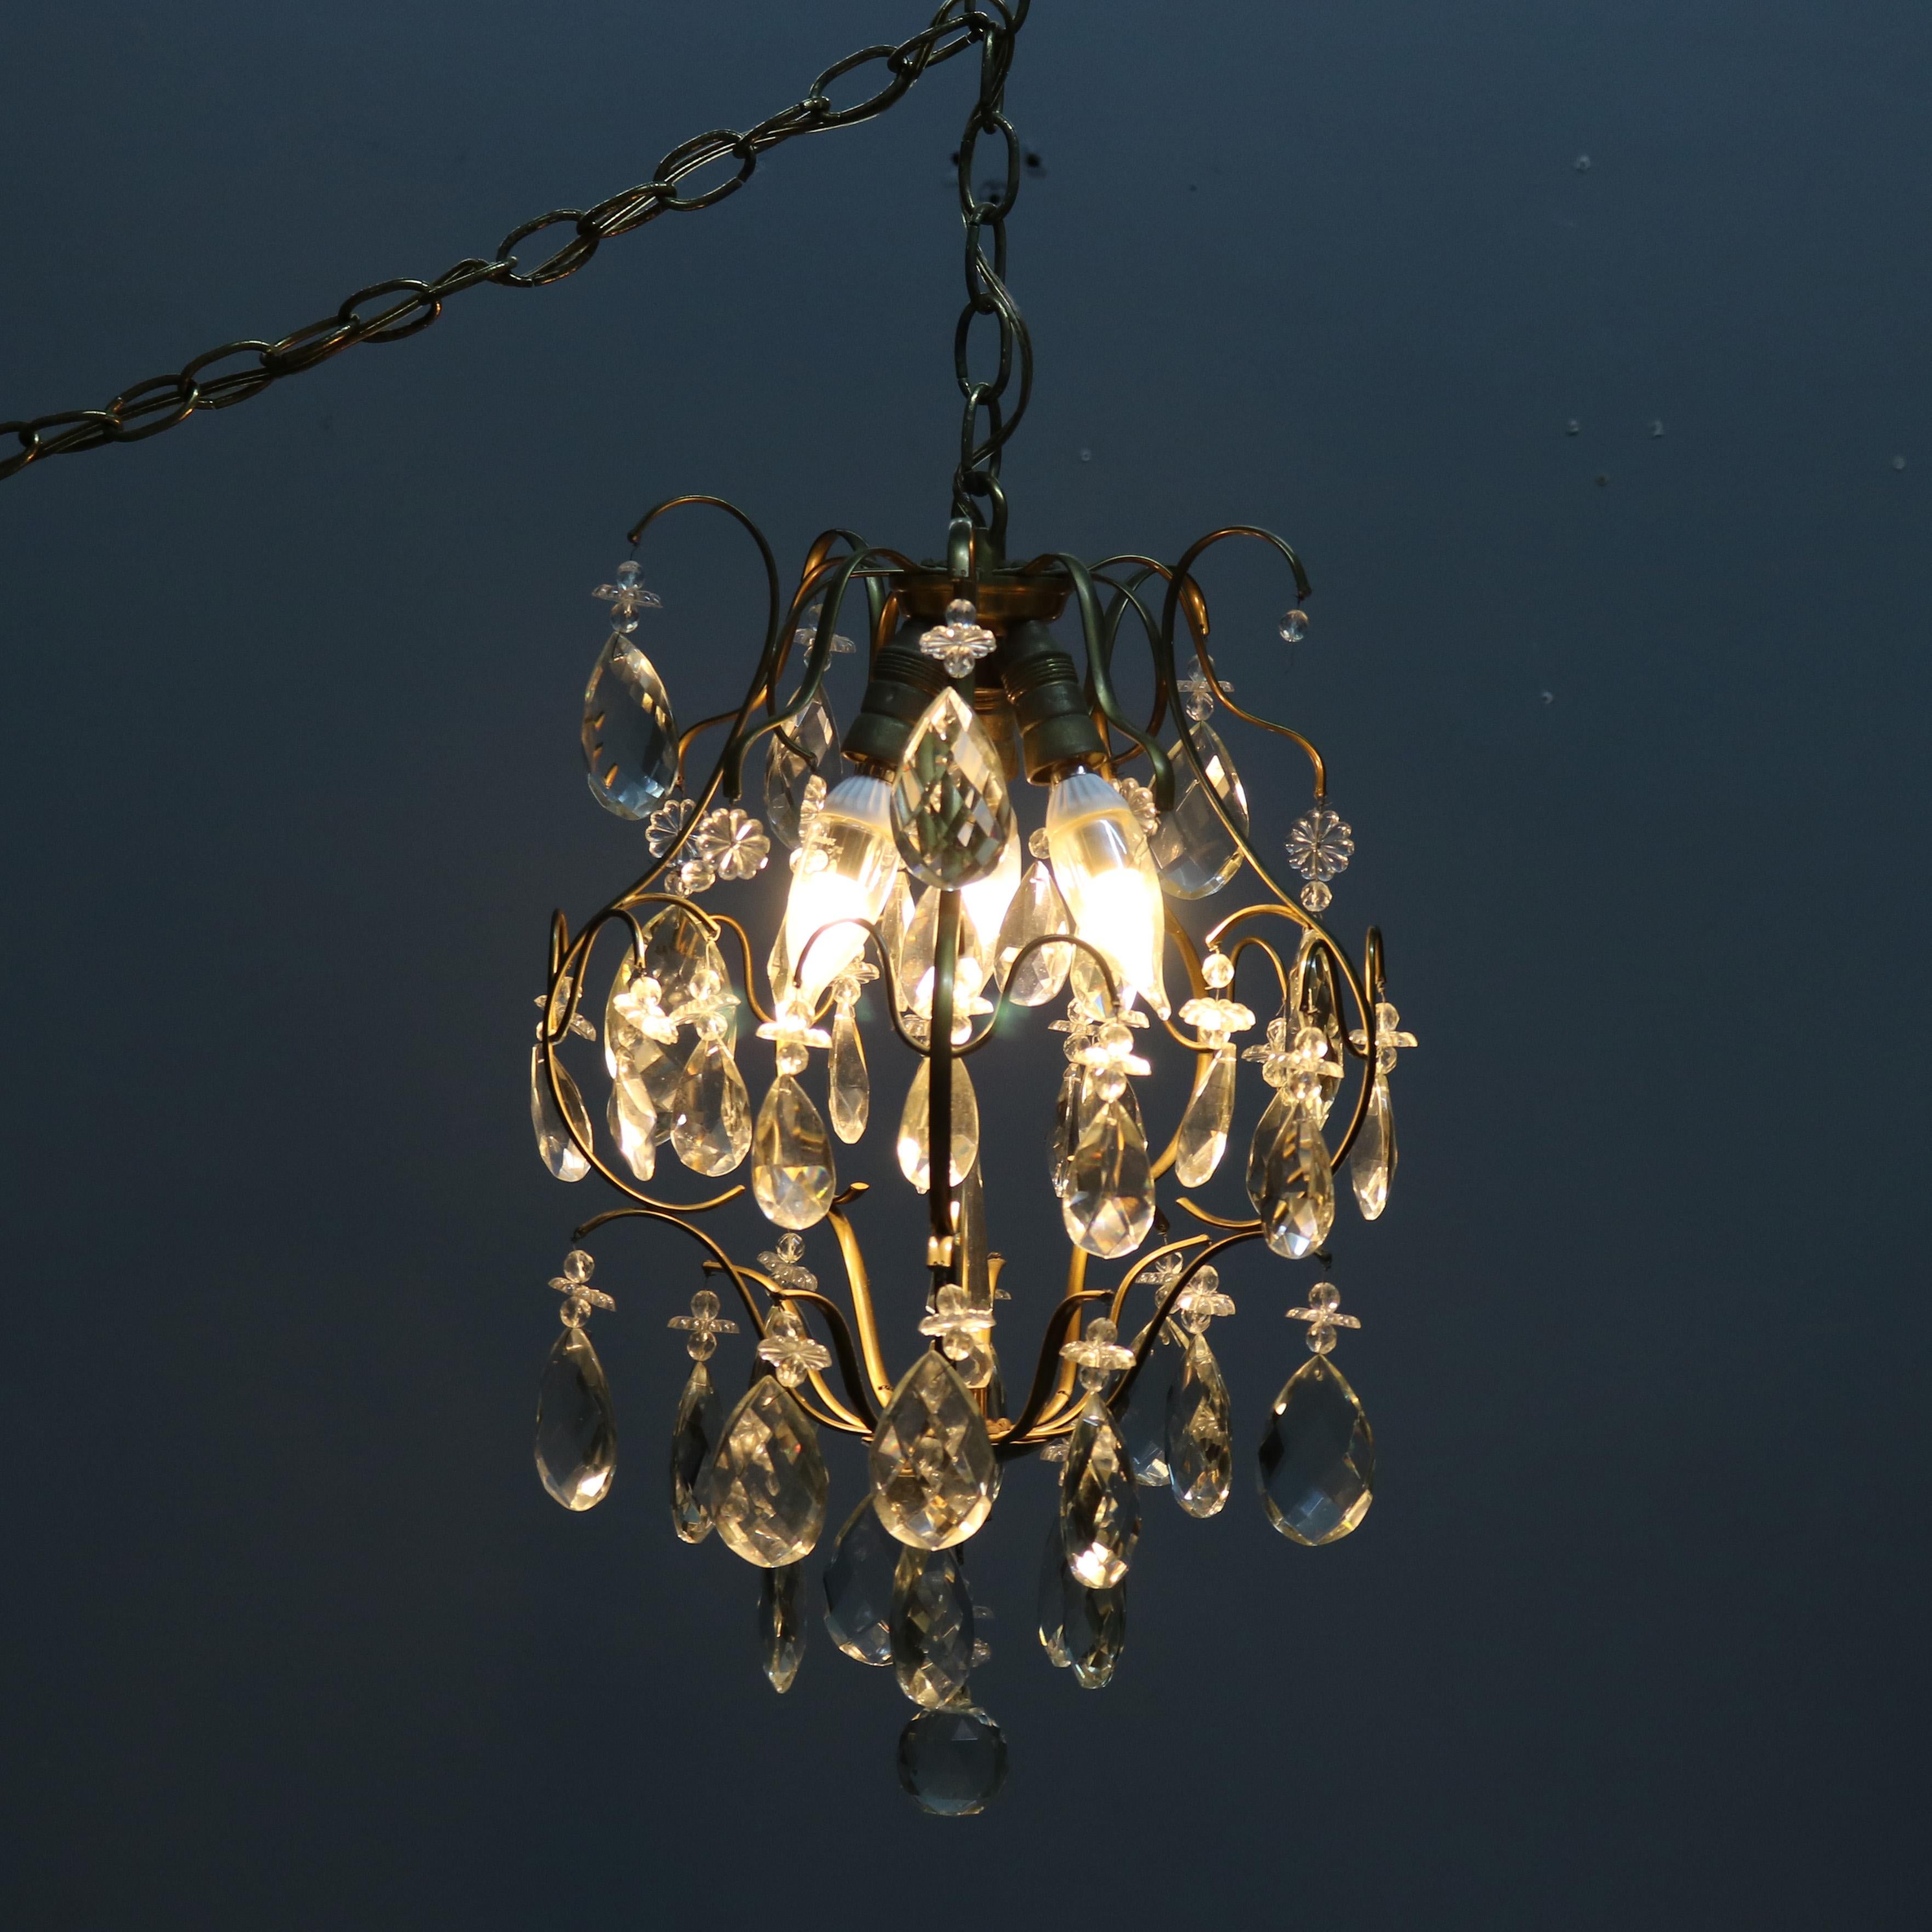 A vintage French style hall chandelier offers scrolled brass frame with hanging crystals throughout, circa 1940

Measures: 17